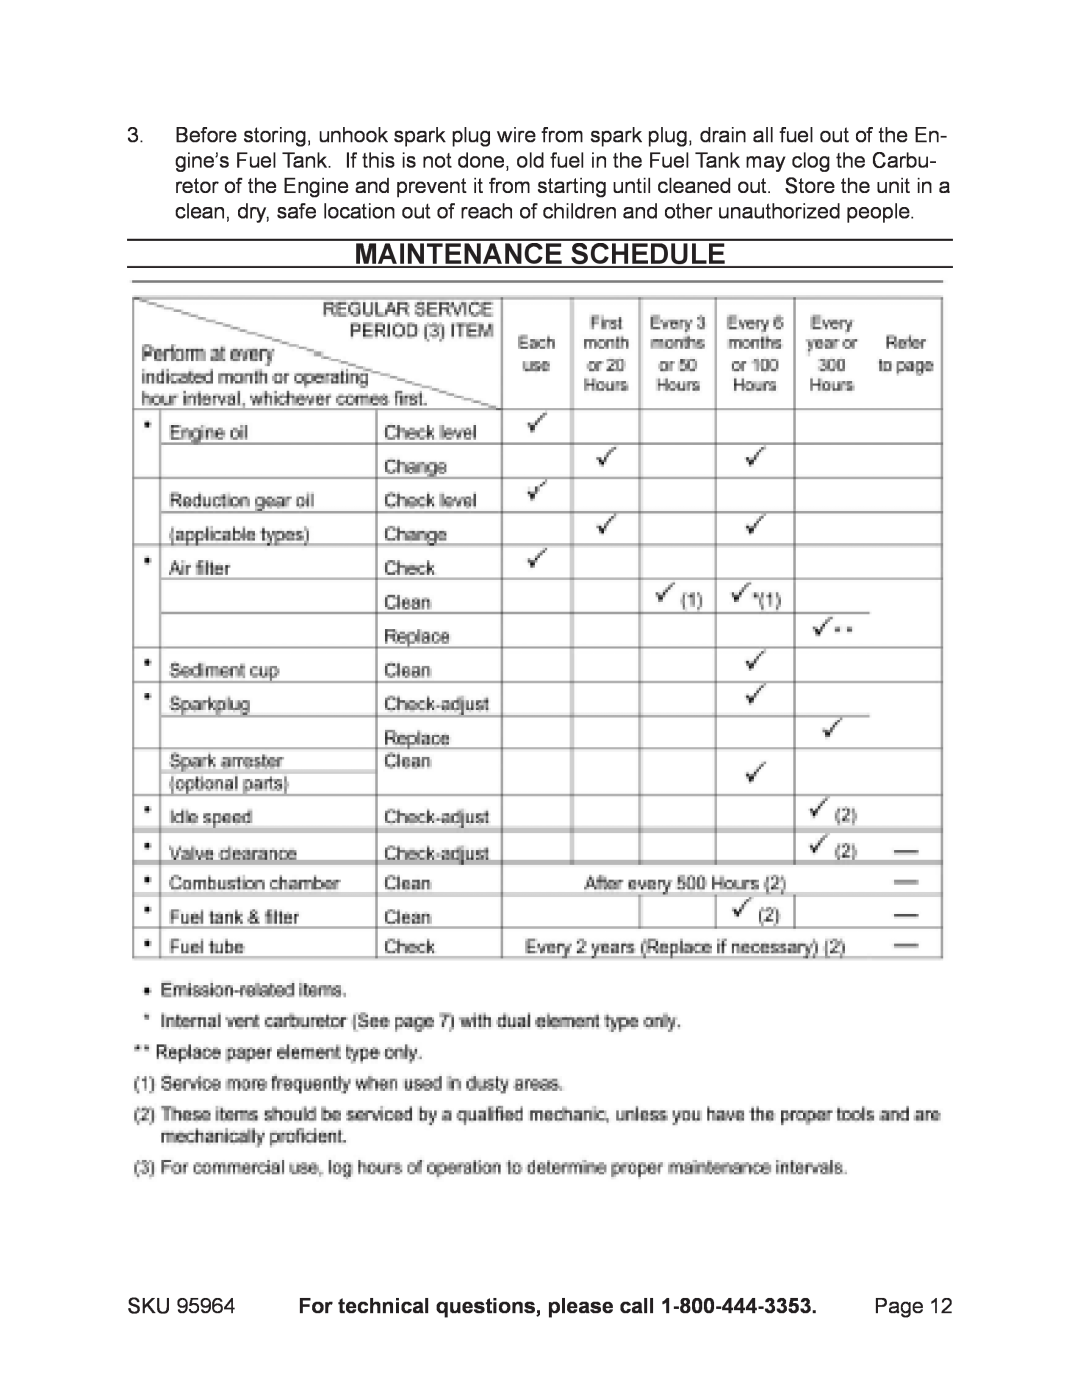 Harbor Freight Tools 95964 operating instructions Maintenance schedule, For technical questions, please call 